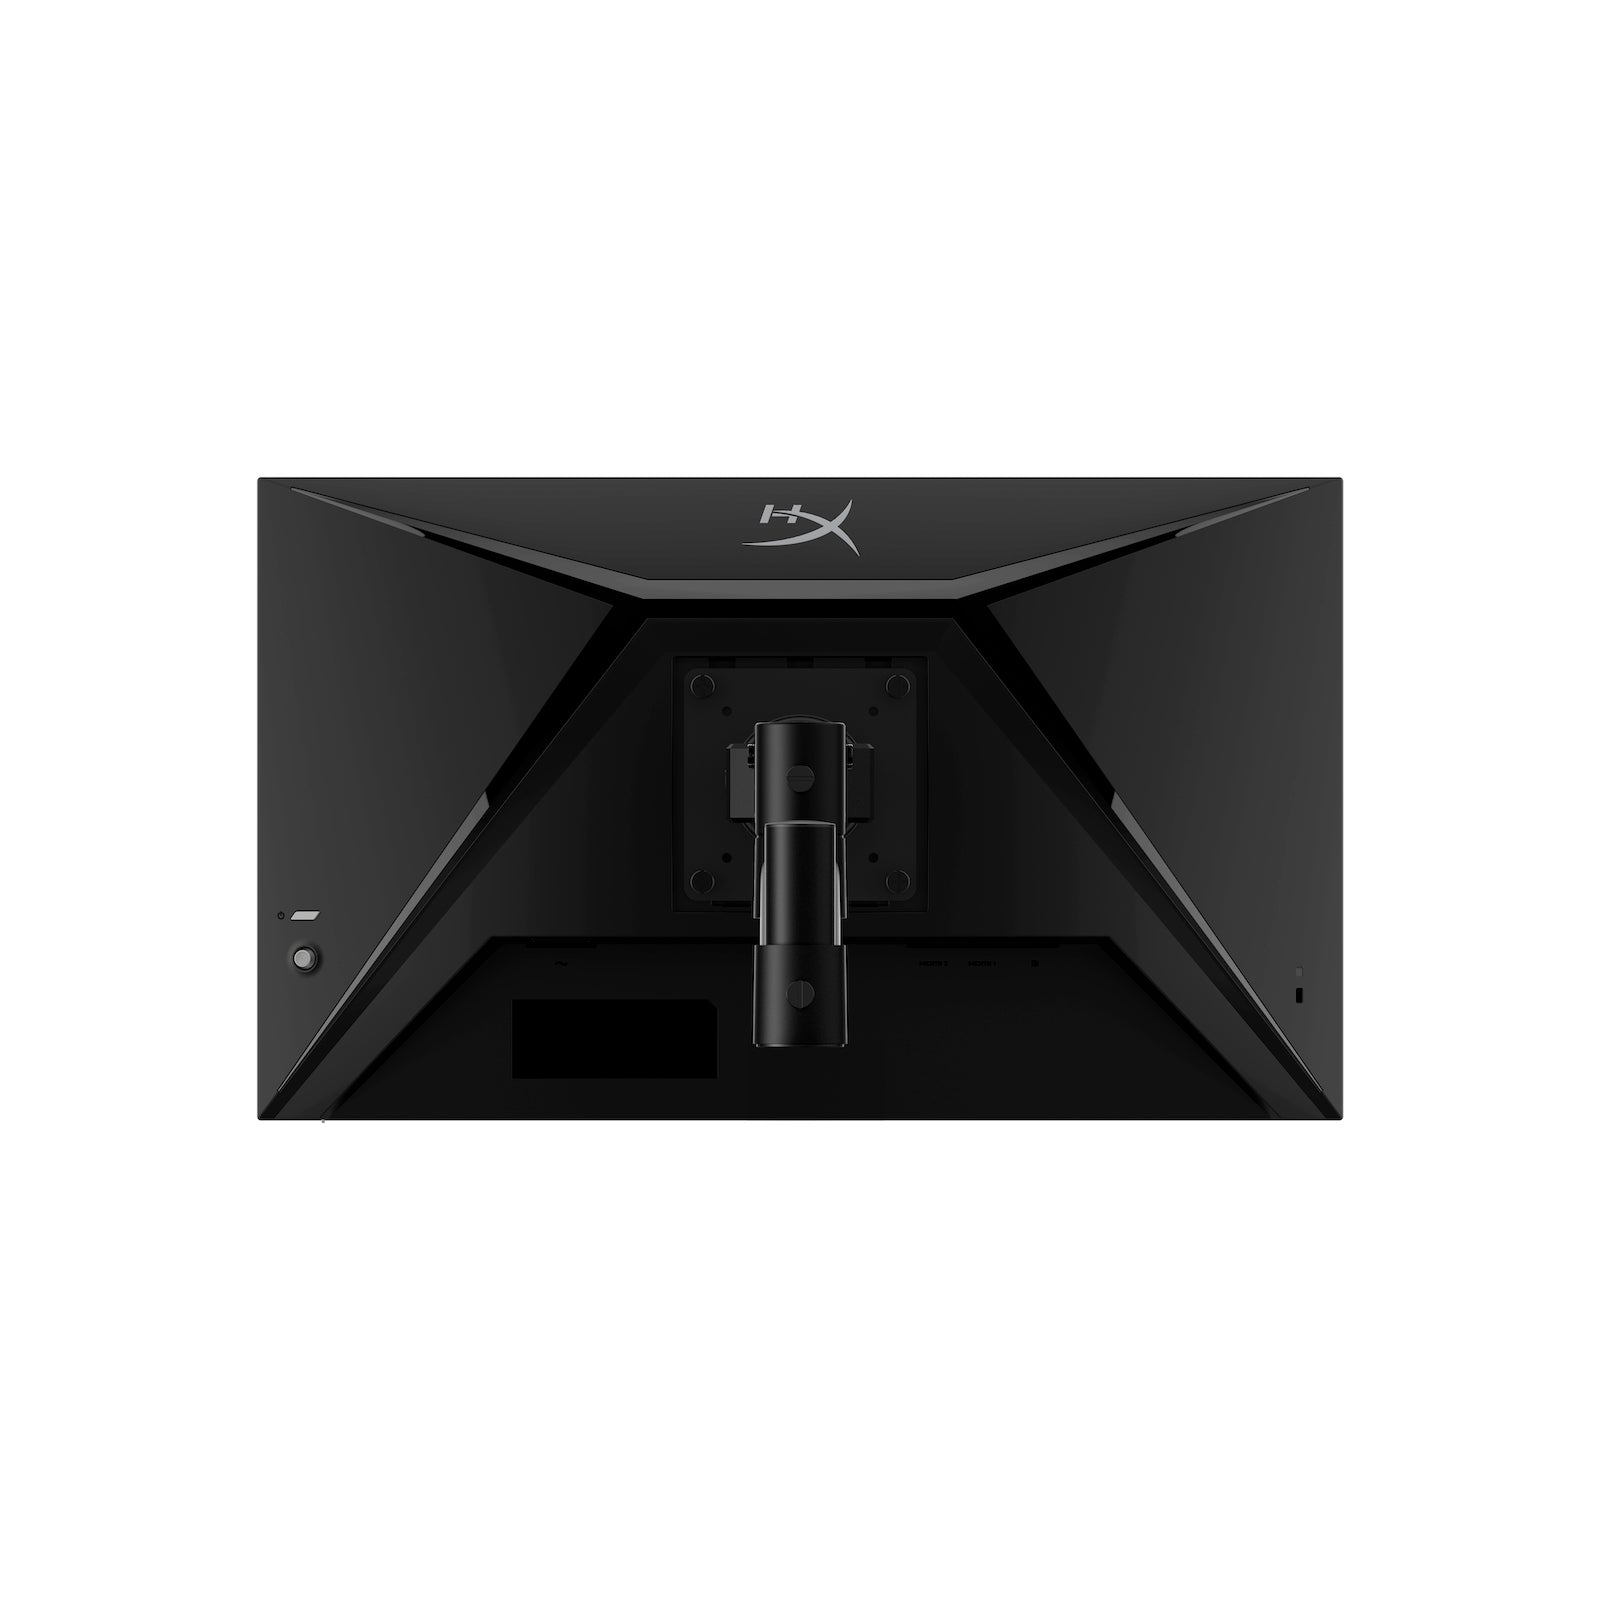 HyperX Armada Gaming Monitor Additional Mount Back View 